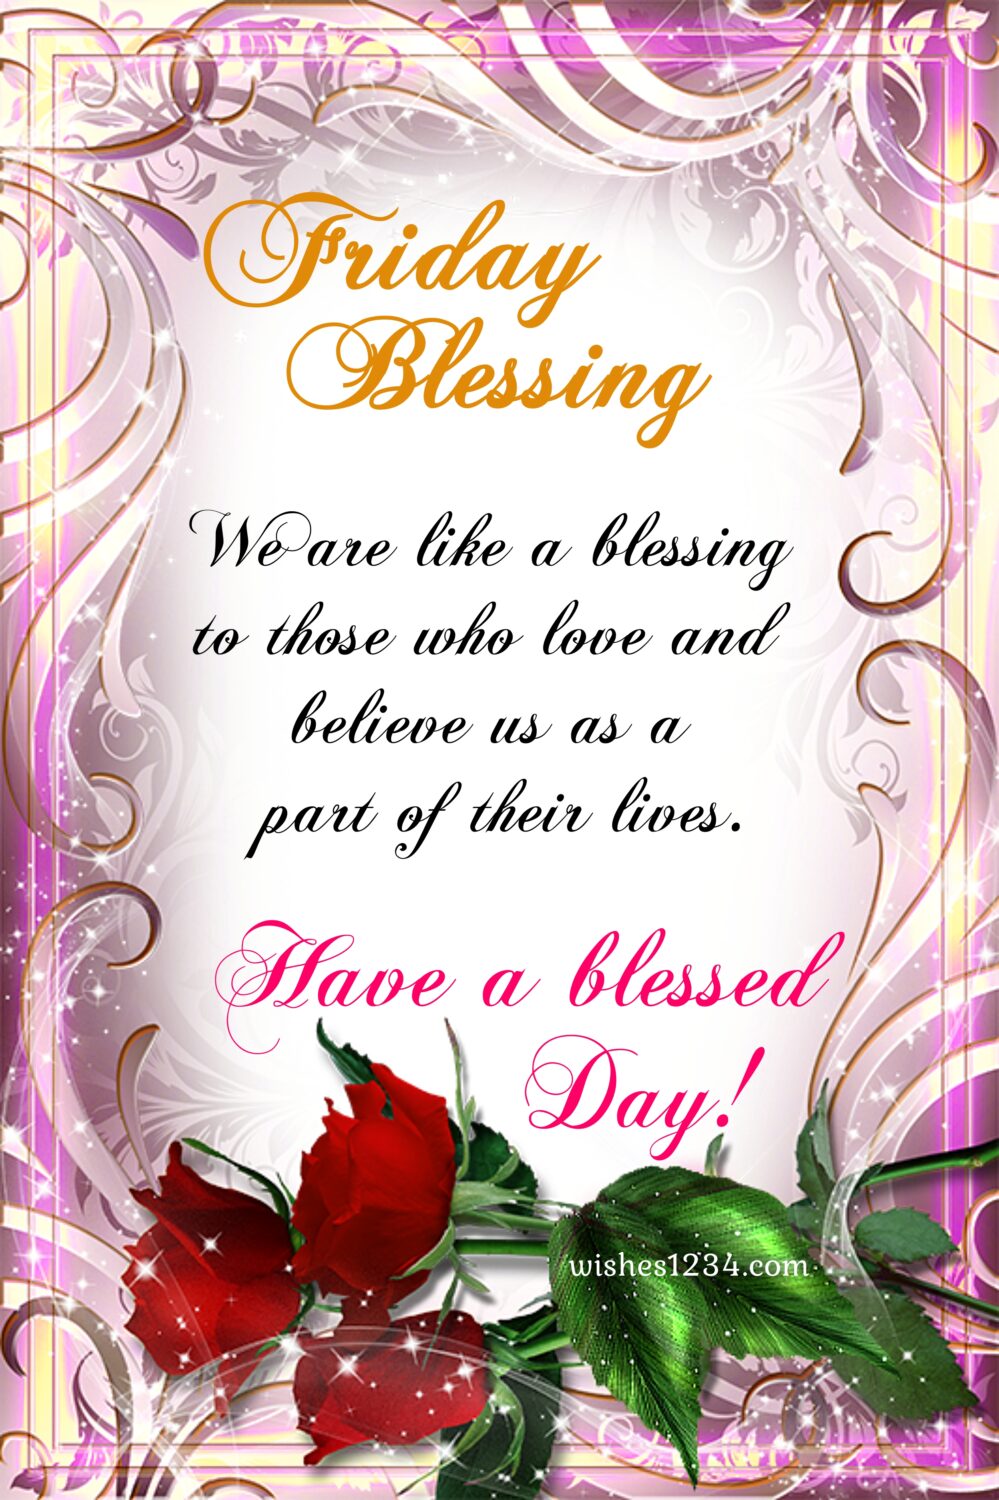 Red roses with Friday blessings, Friday blessings.